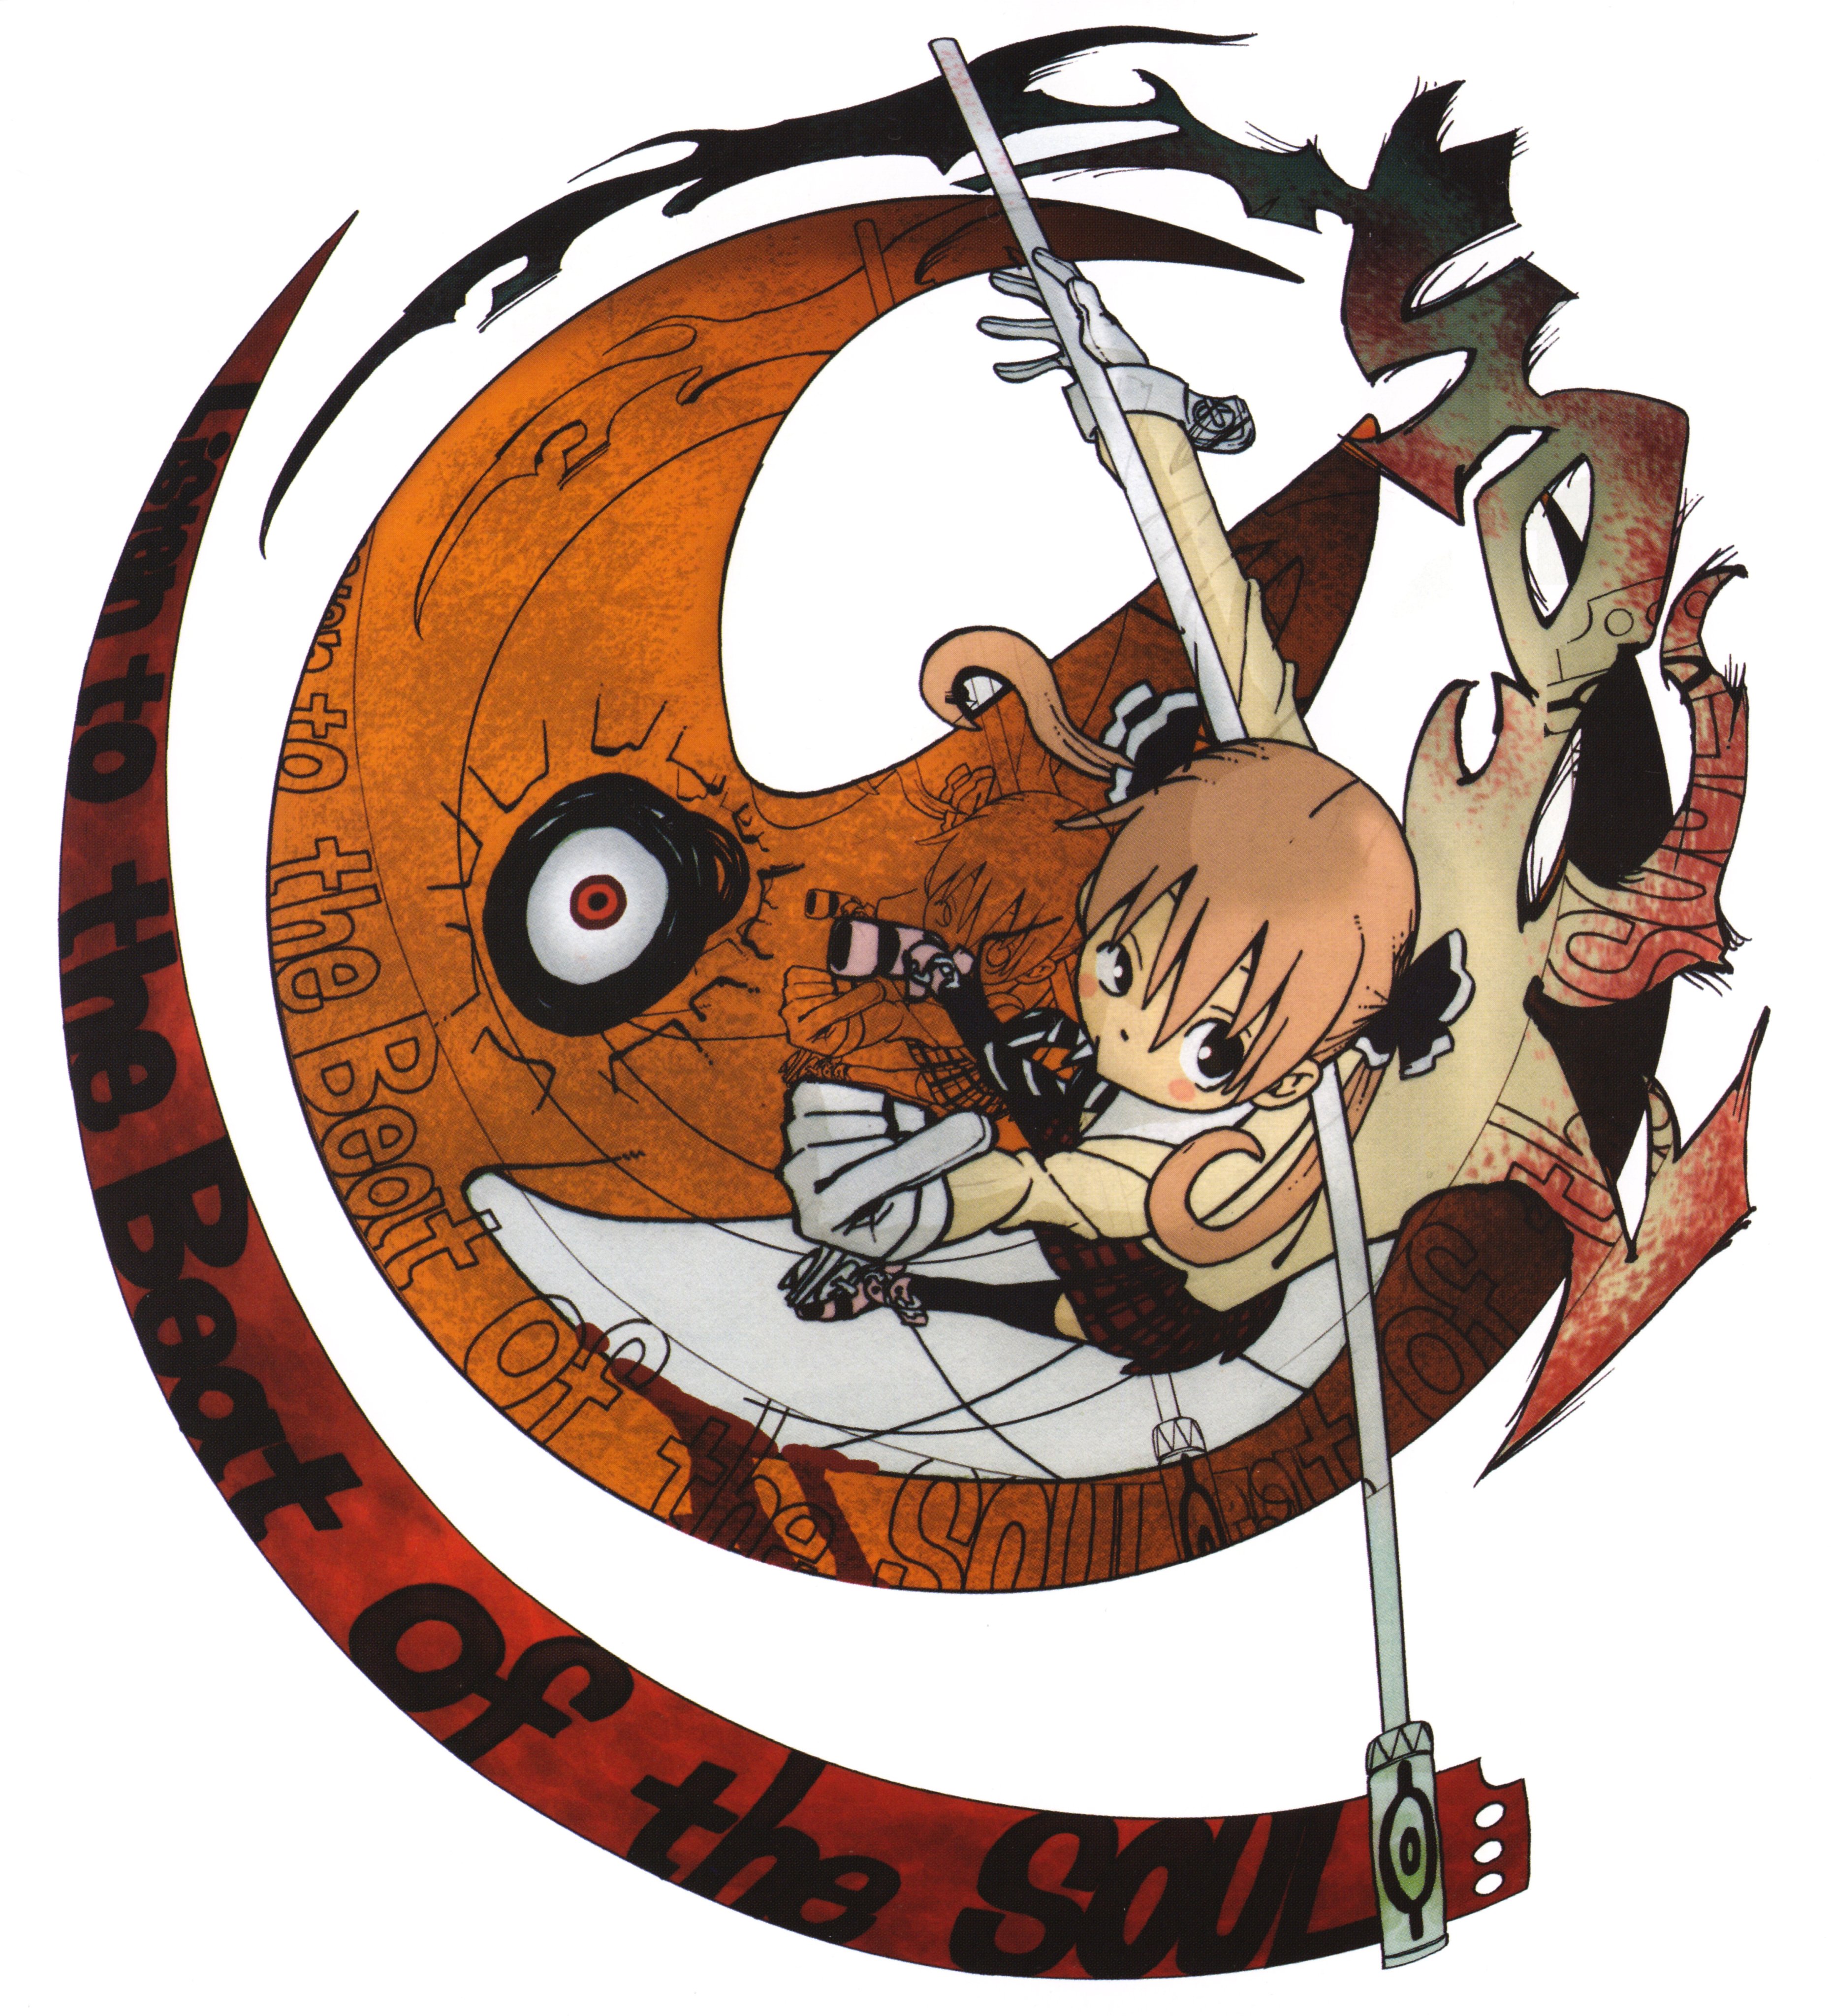 Is a Soul Eater Reboot Confirmed? (@SoulEaterReboot) / X